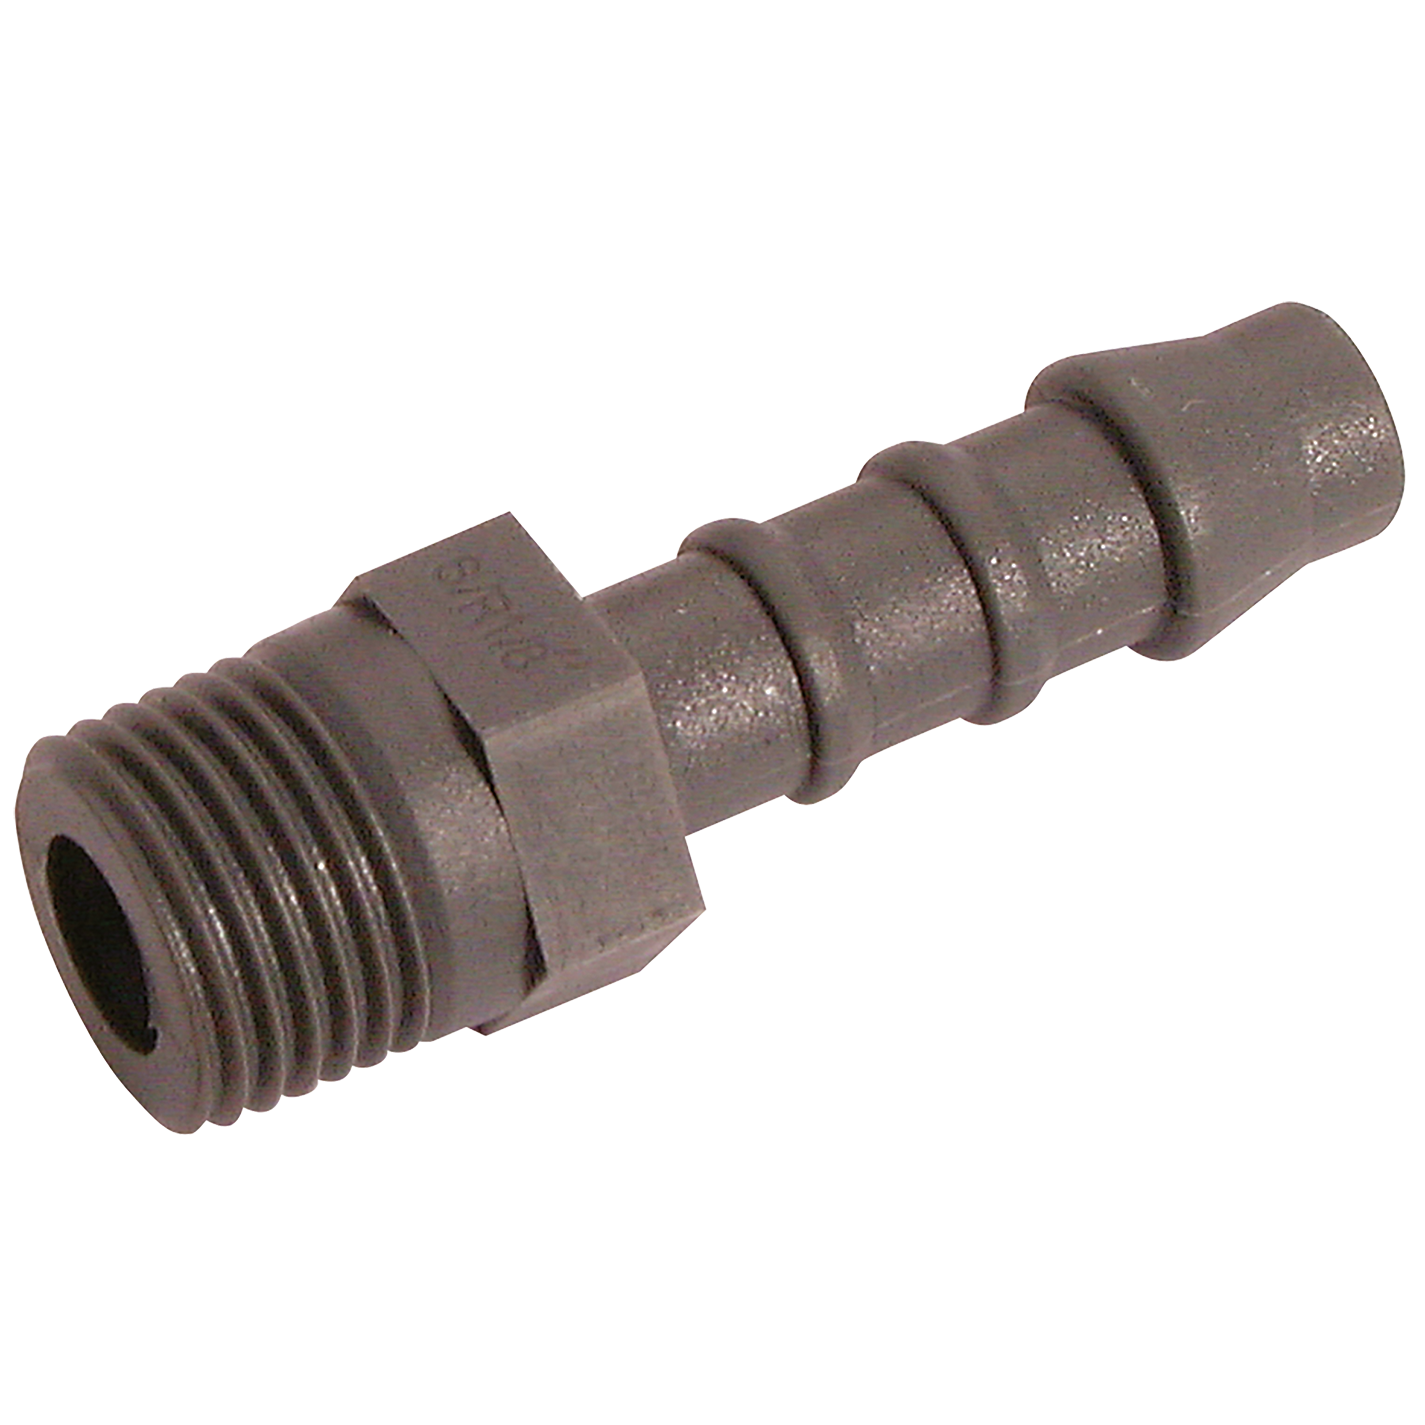 1/8" BSPT Male NORMA® Plastic Hose Connector